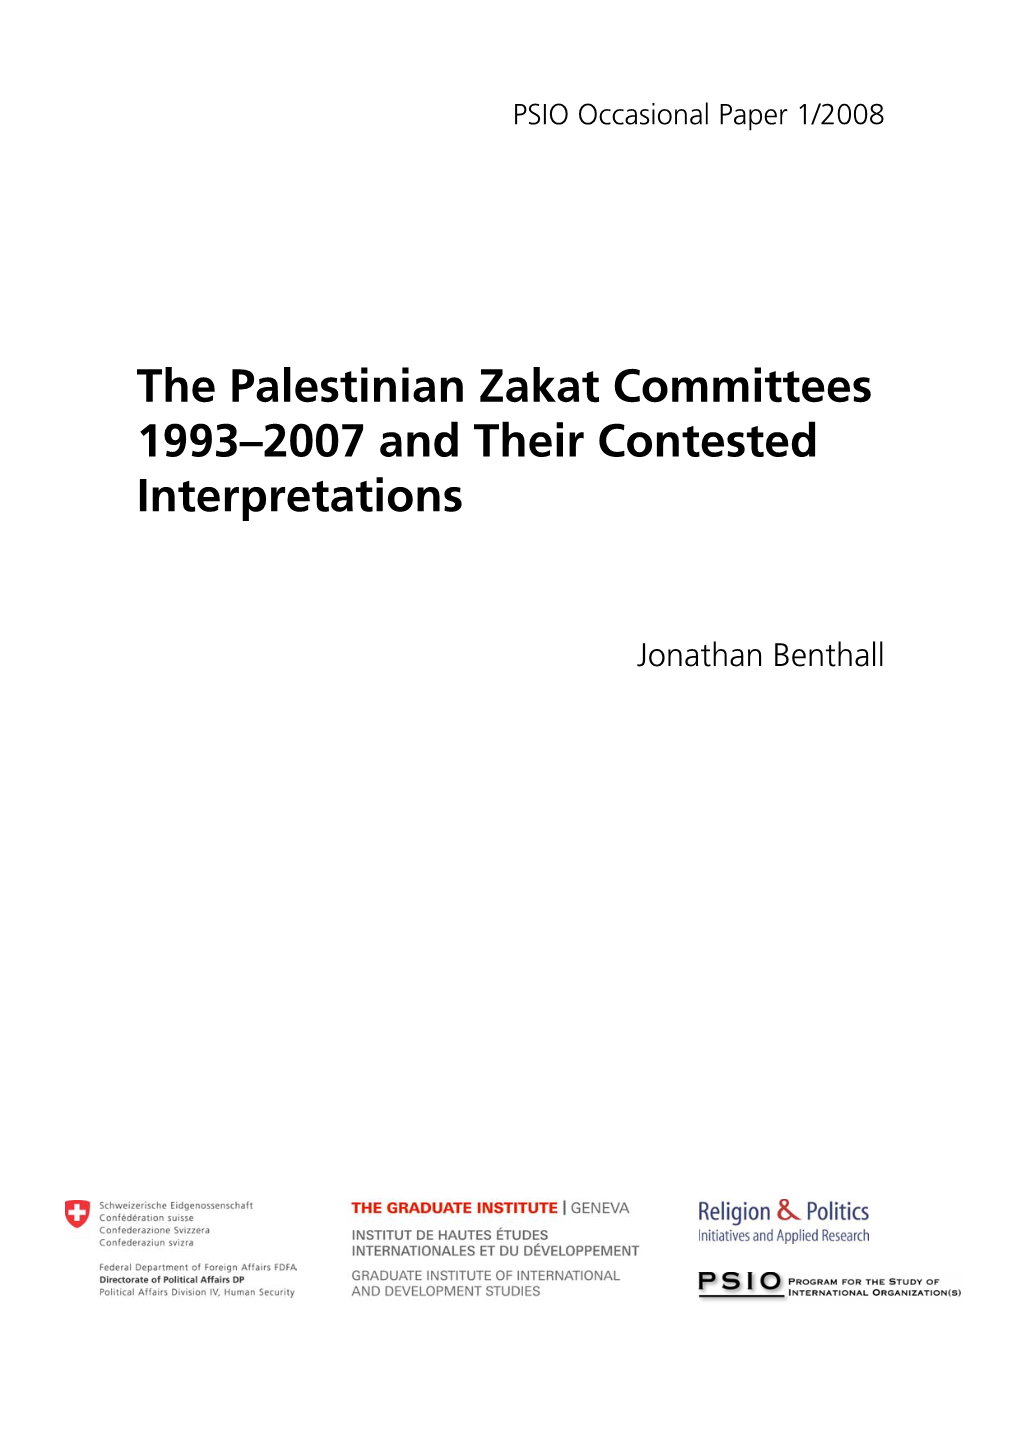 The Palestinian Zakat Committees 1993–2007 and Their Contested Interpretations